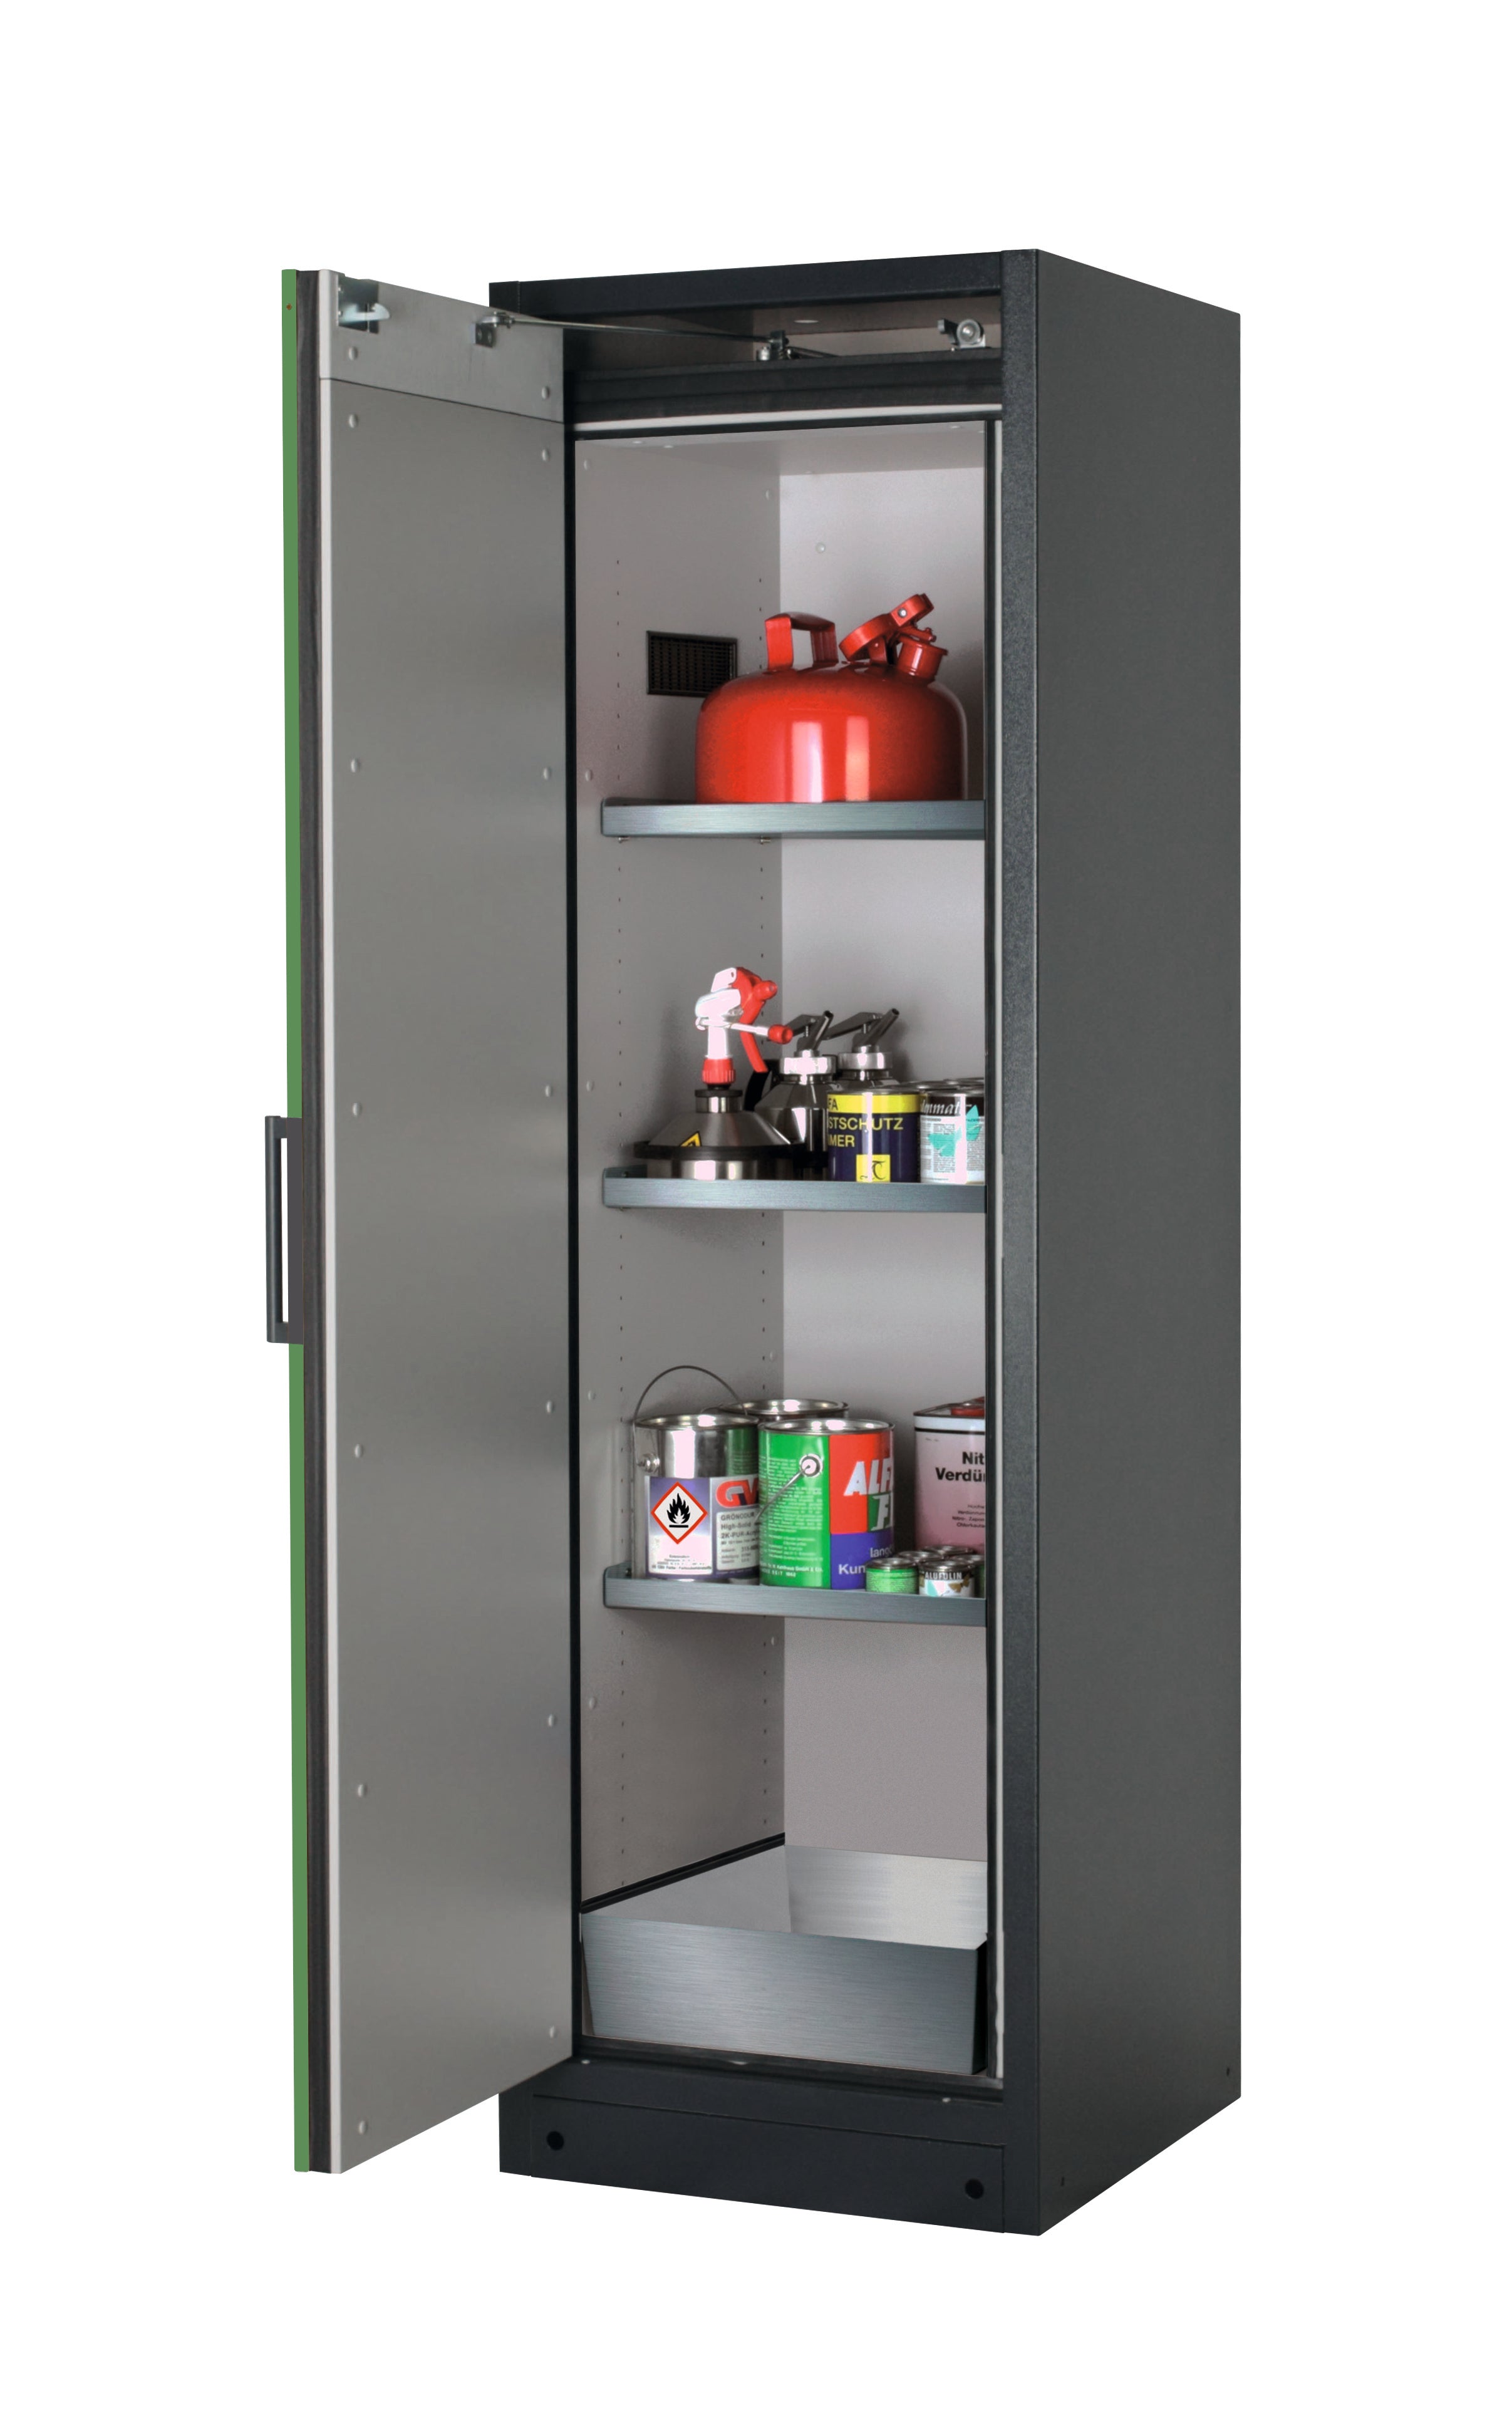 Type 90 safety storage cabinet Q-CLASSIC-90 model Q90.195.060 in reseda green RAL 6011 with 3x shelf standard (stainless steel 1.4301),